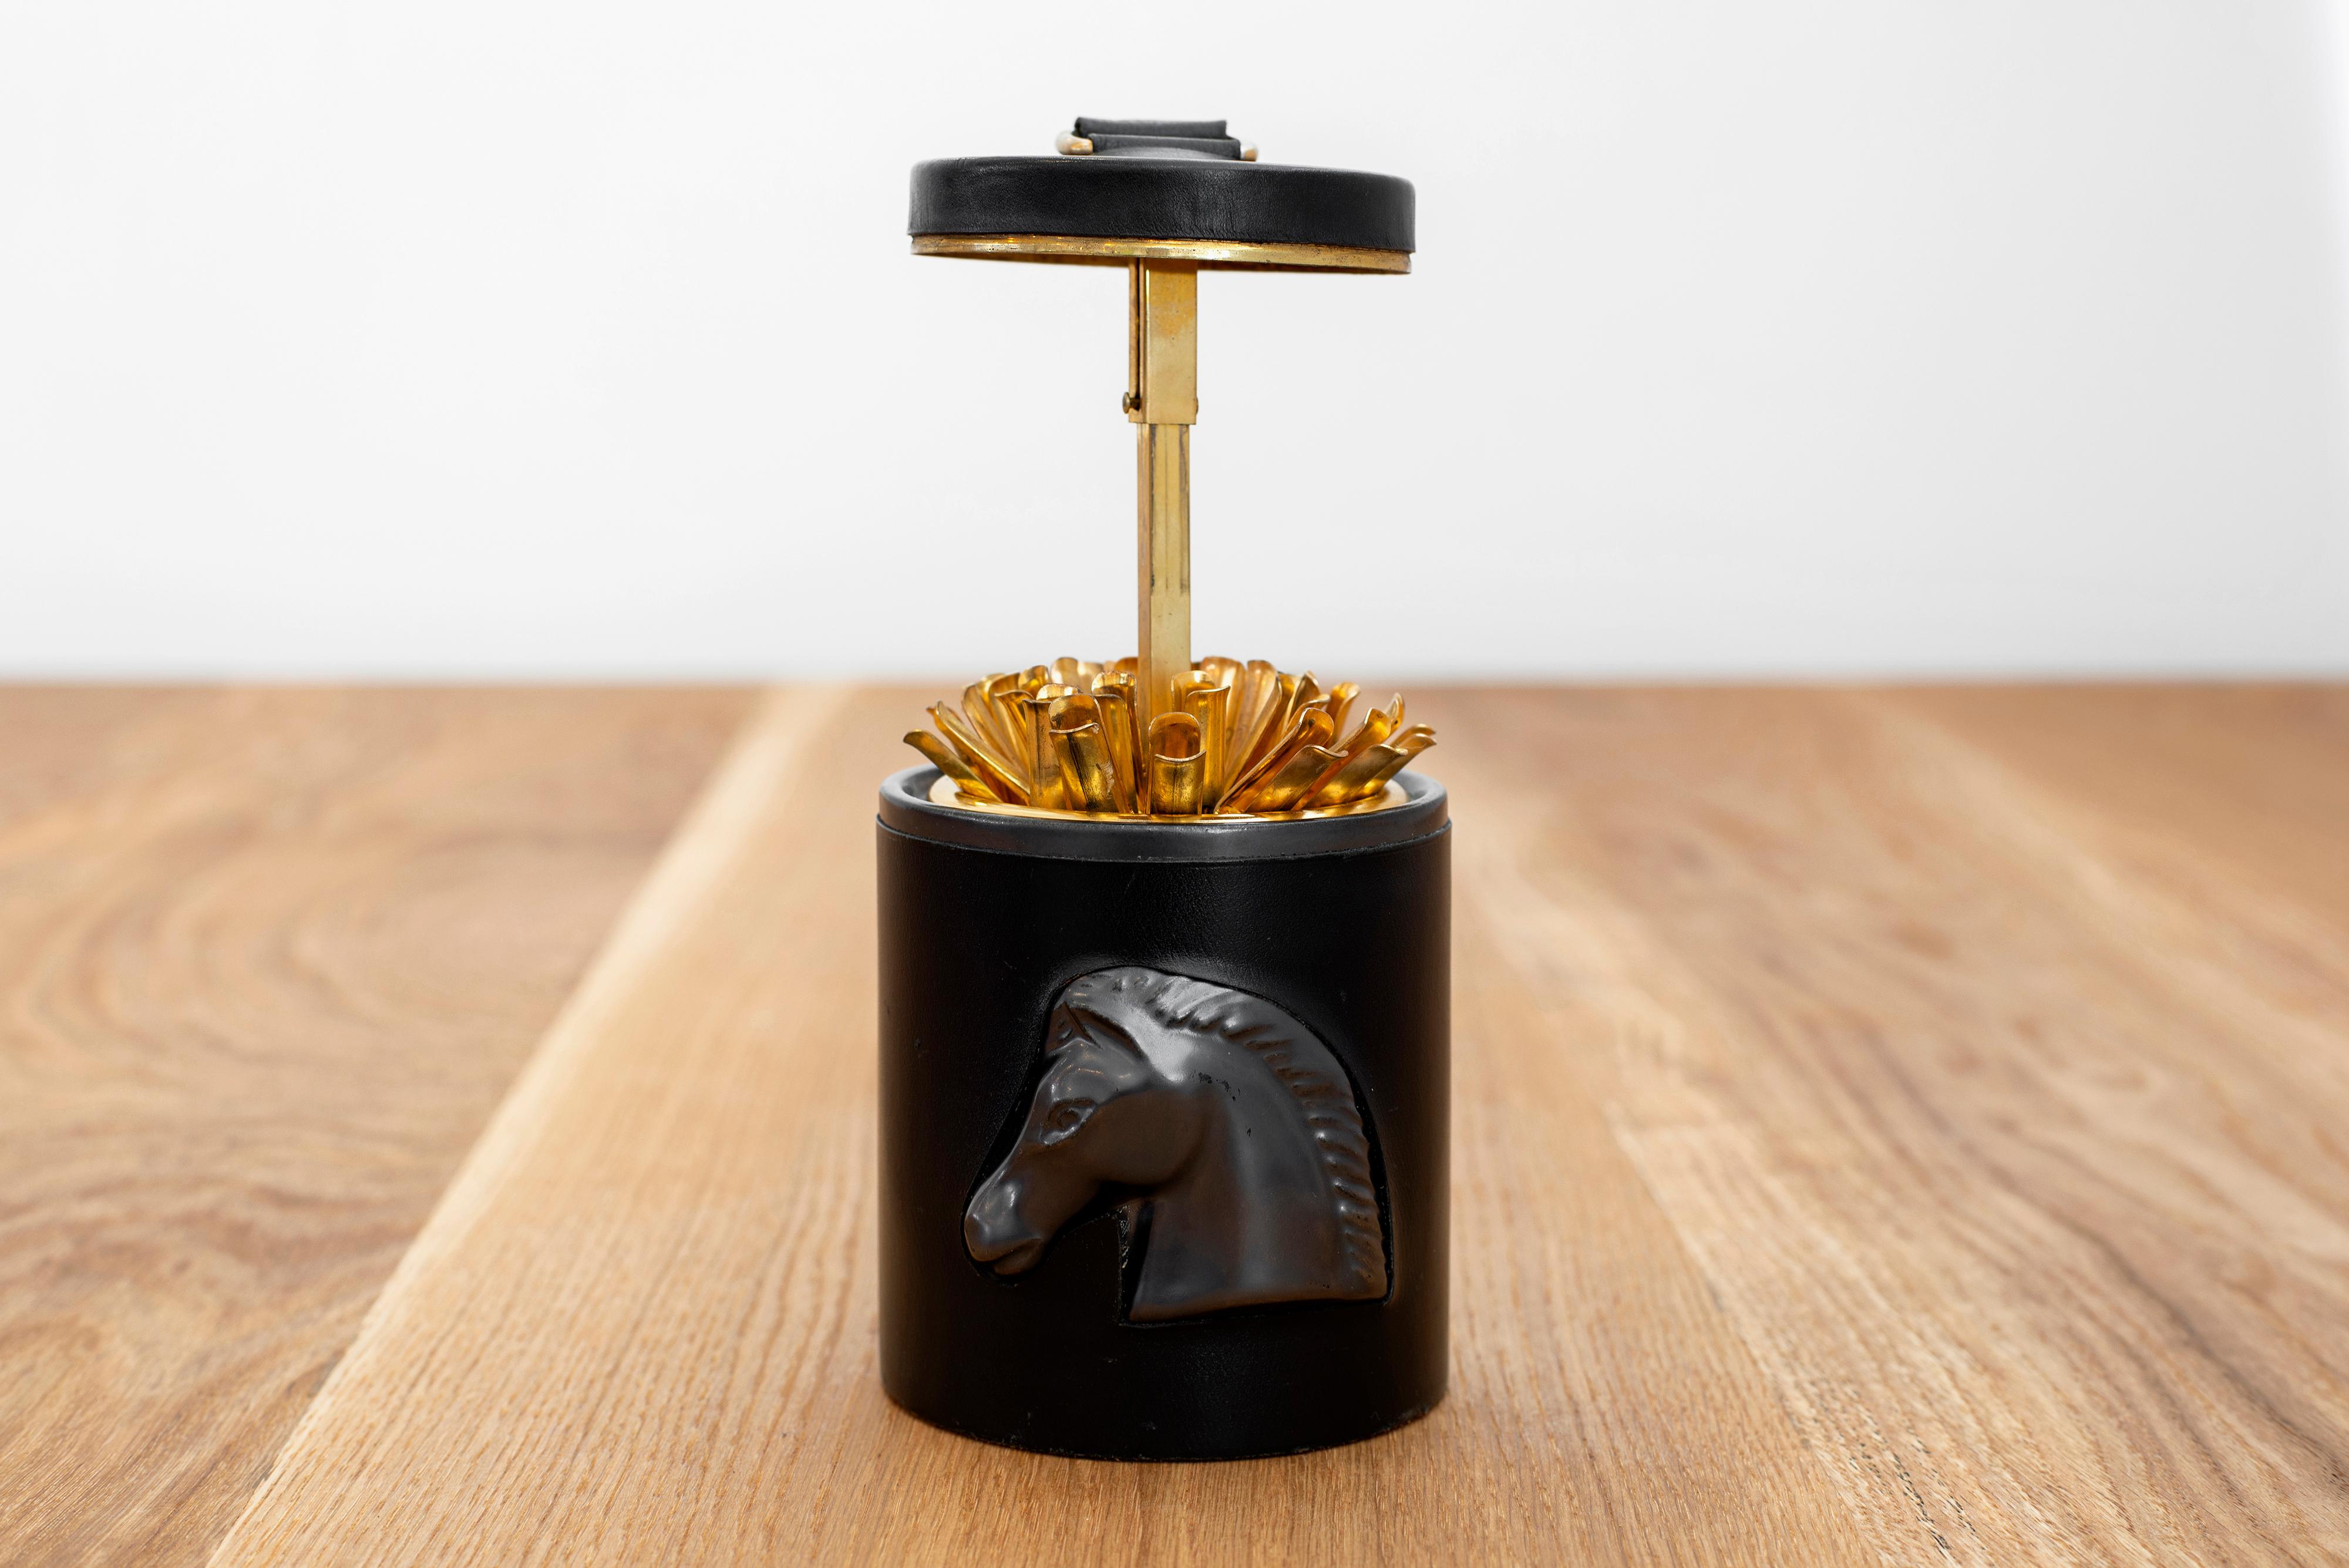 Great cigarette holder in the style of Jacques Adnet with horse head relief.
The leather top pops up to reveal brass individual cases to hold cigarettes.
enameled ceramic inside and leather with contrast saddle stitching on outside.
Great gift